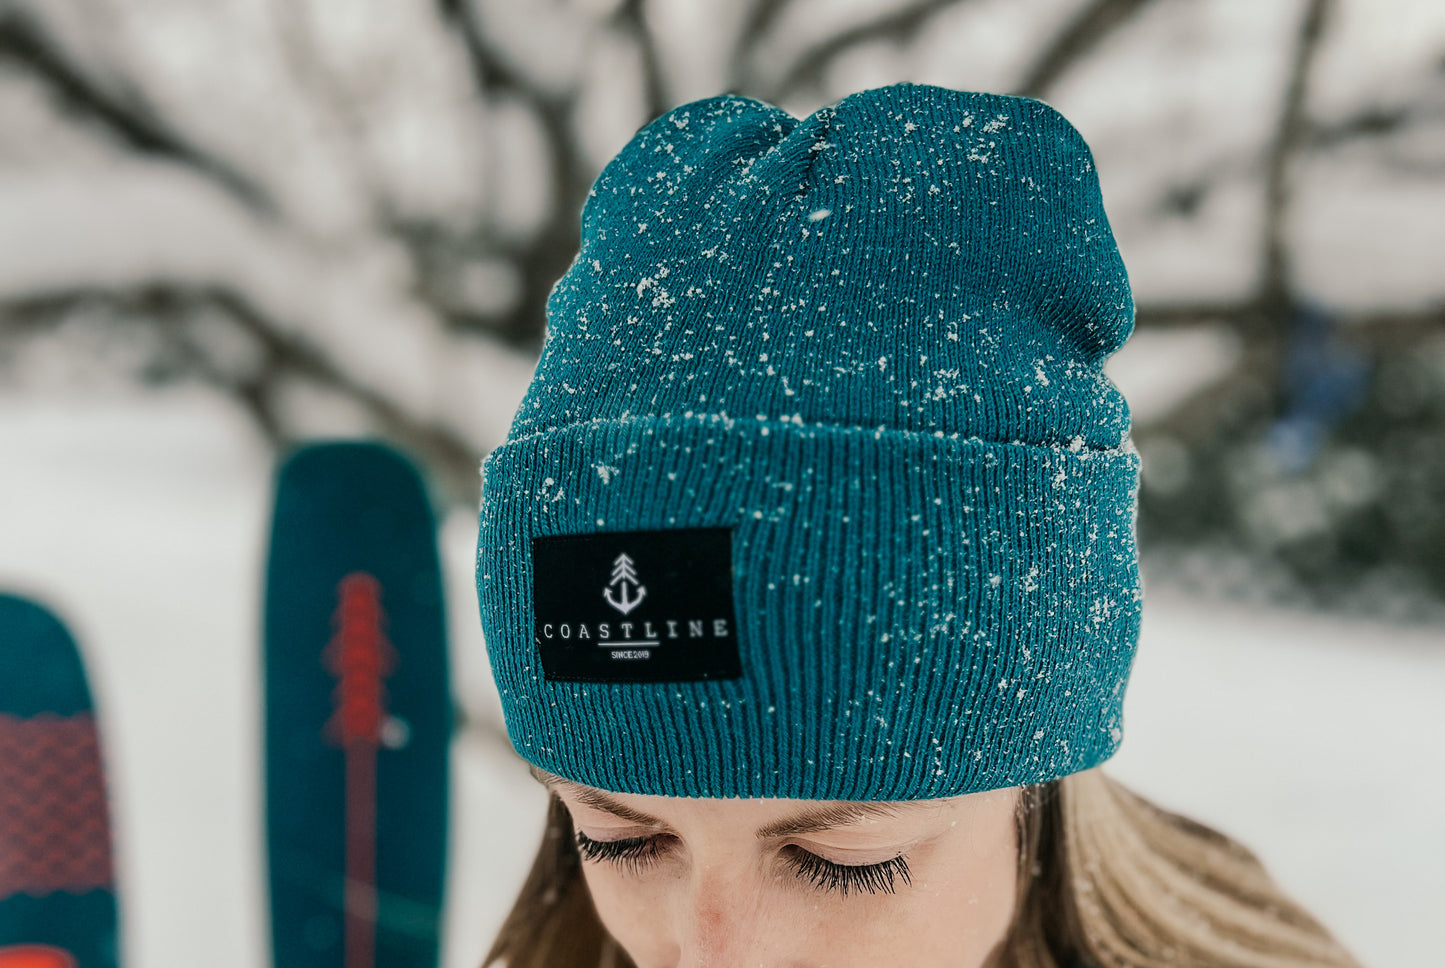 Tuque - Teal